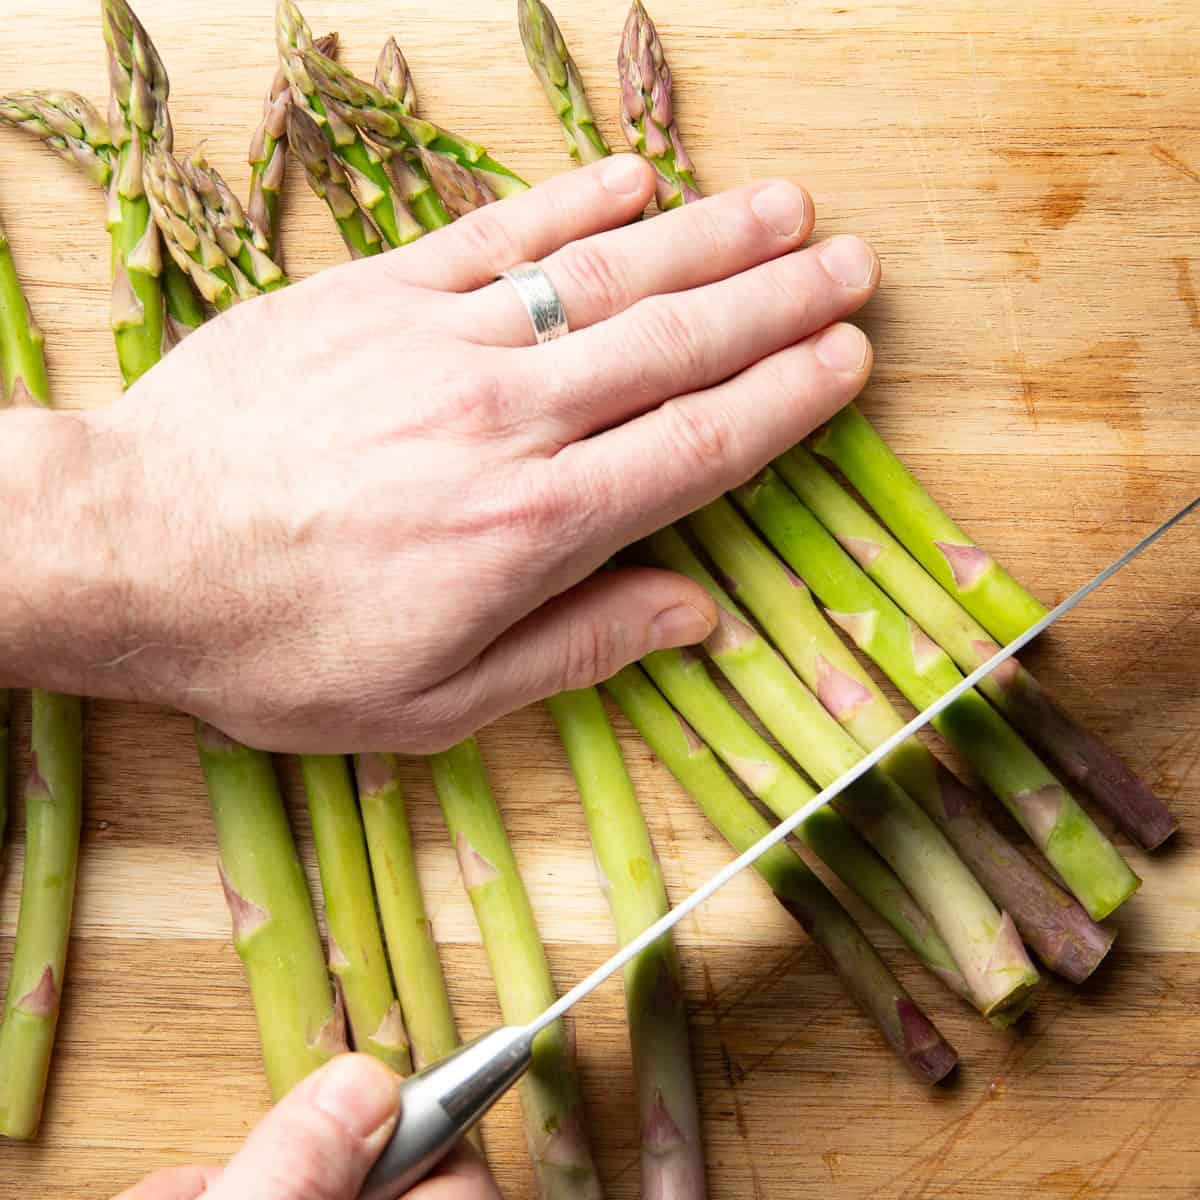 Hand using a knife to trim asparagus spears on a cutting board.